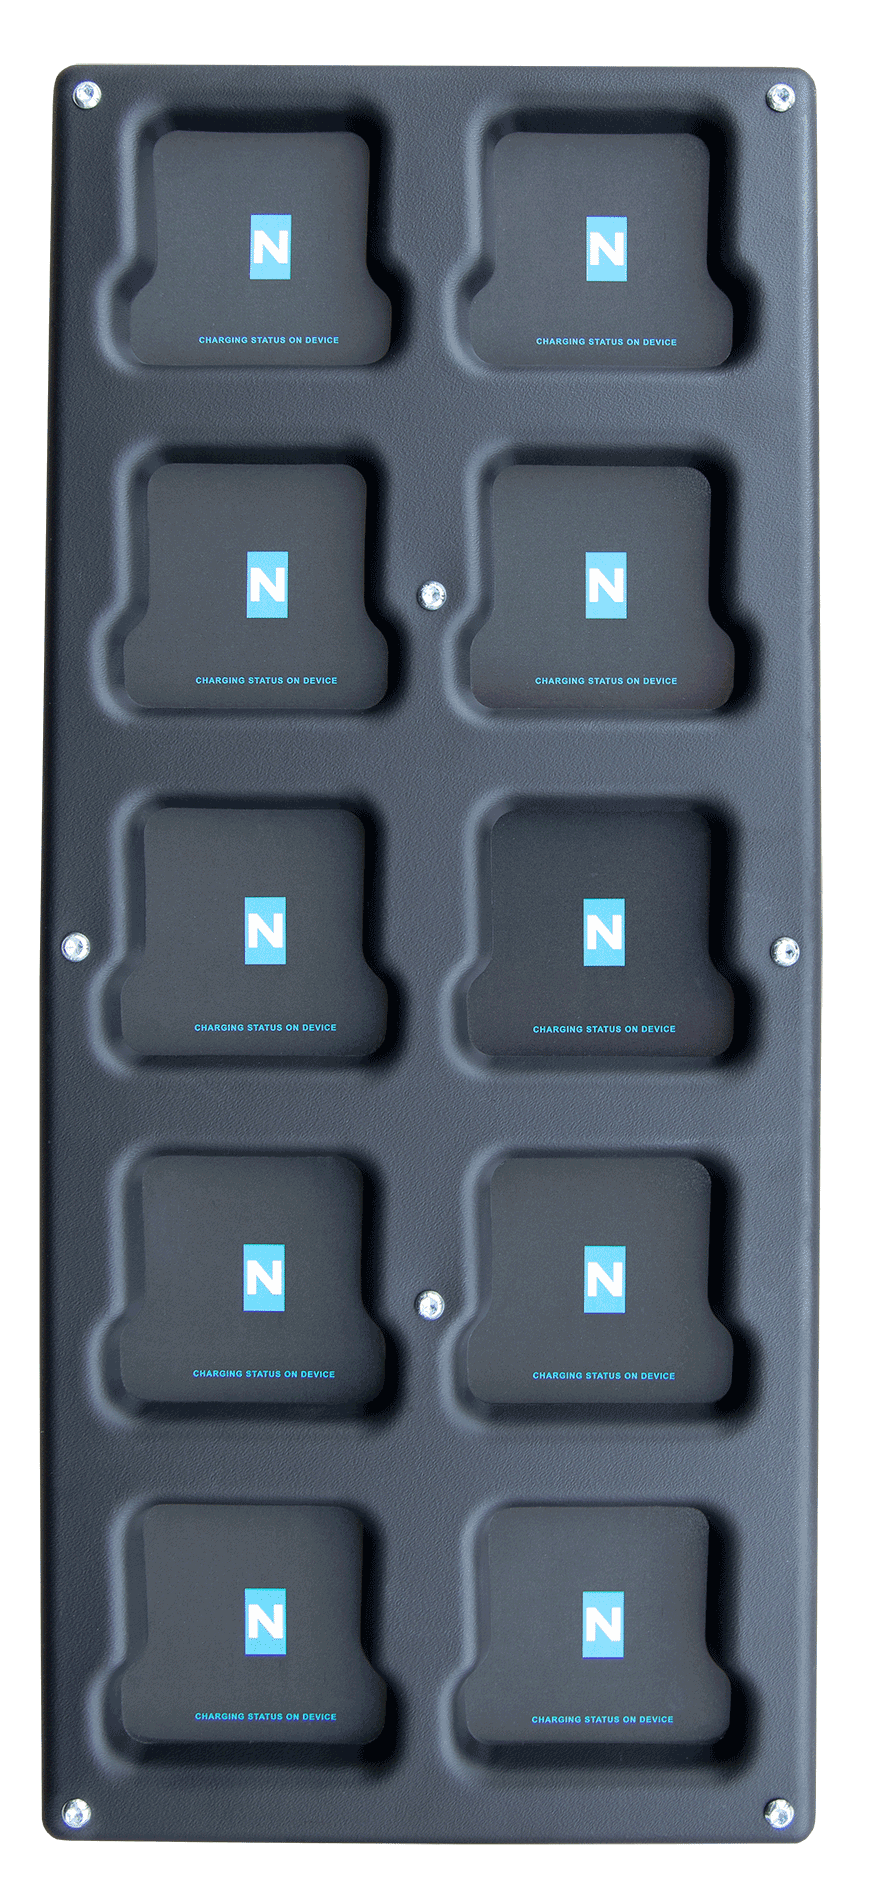 NIMMSTA Charging station for 10 industrial smart watches